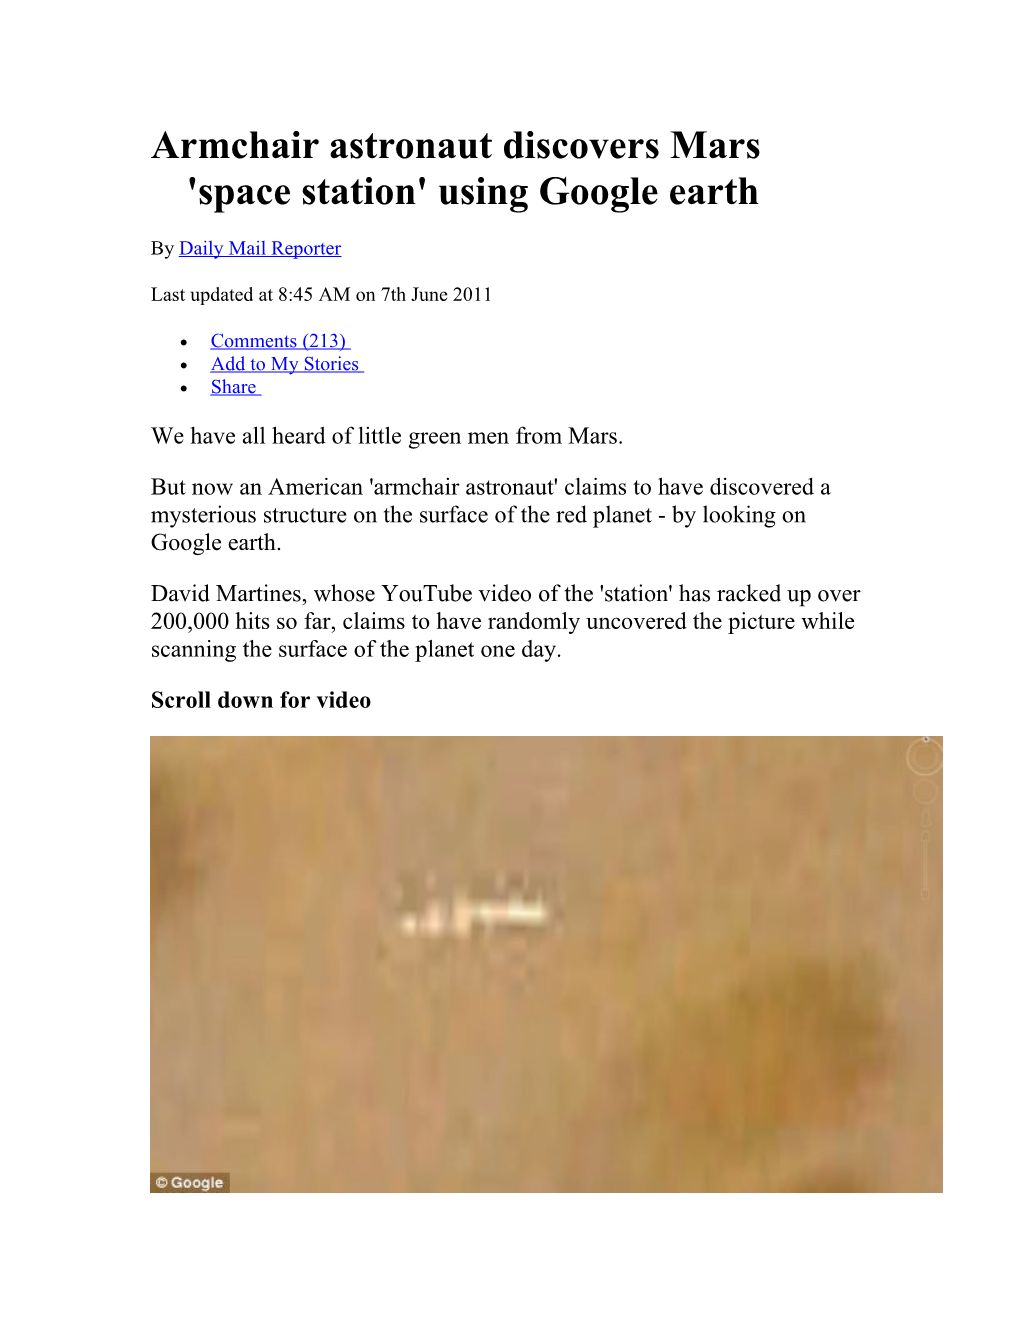 Armchair Astronaut Discovers Mars 'Space Station' Using Google Earth